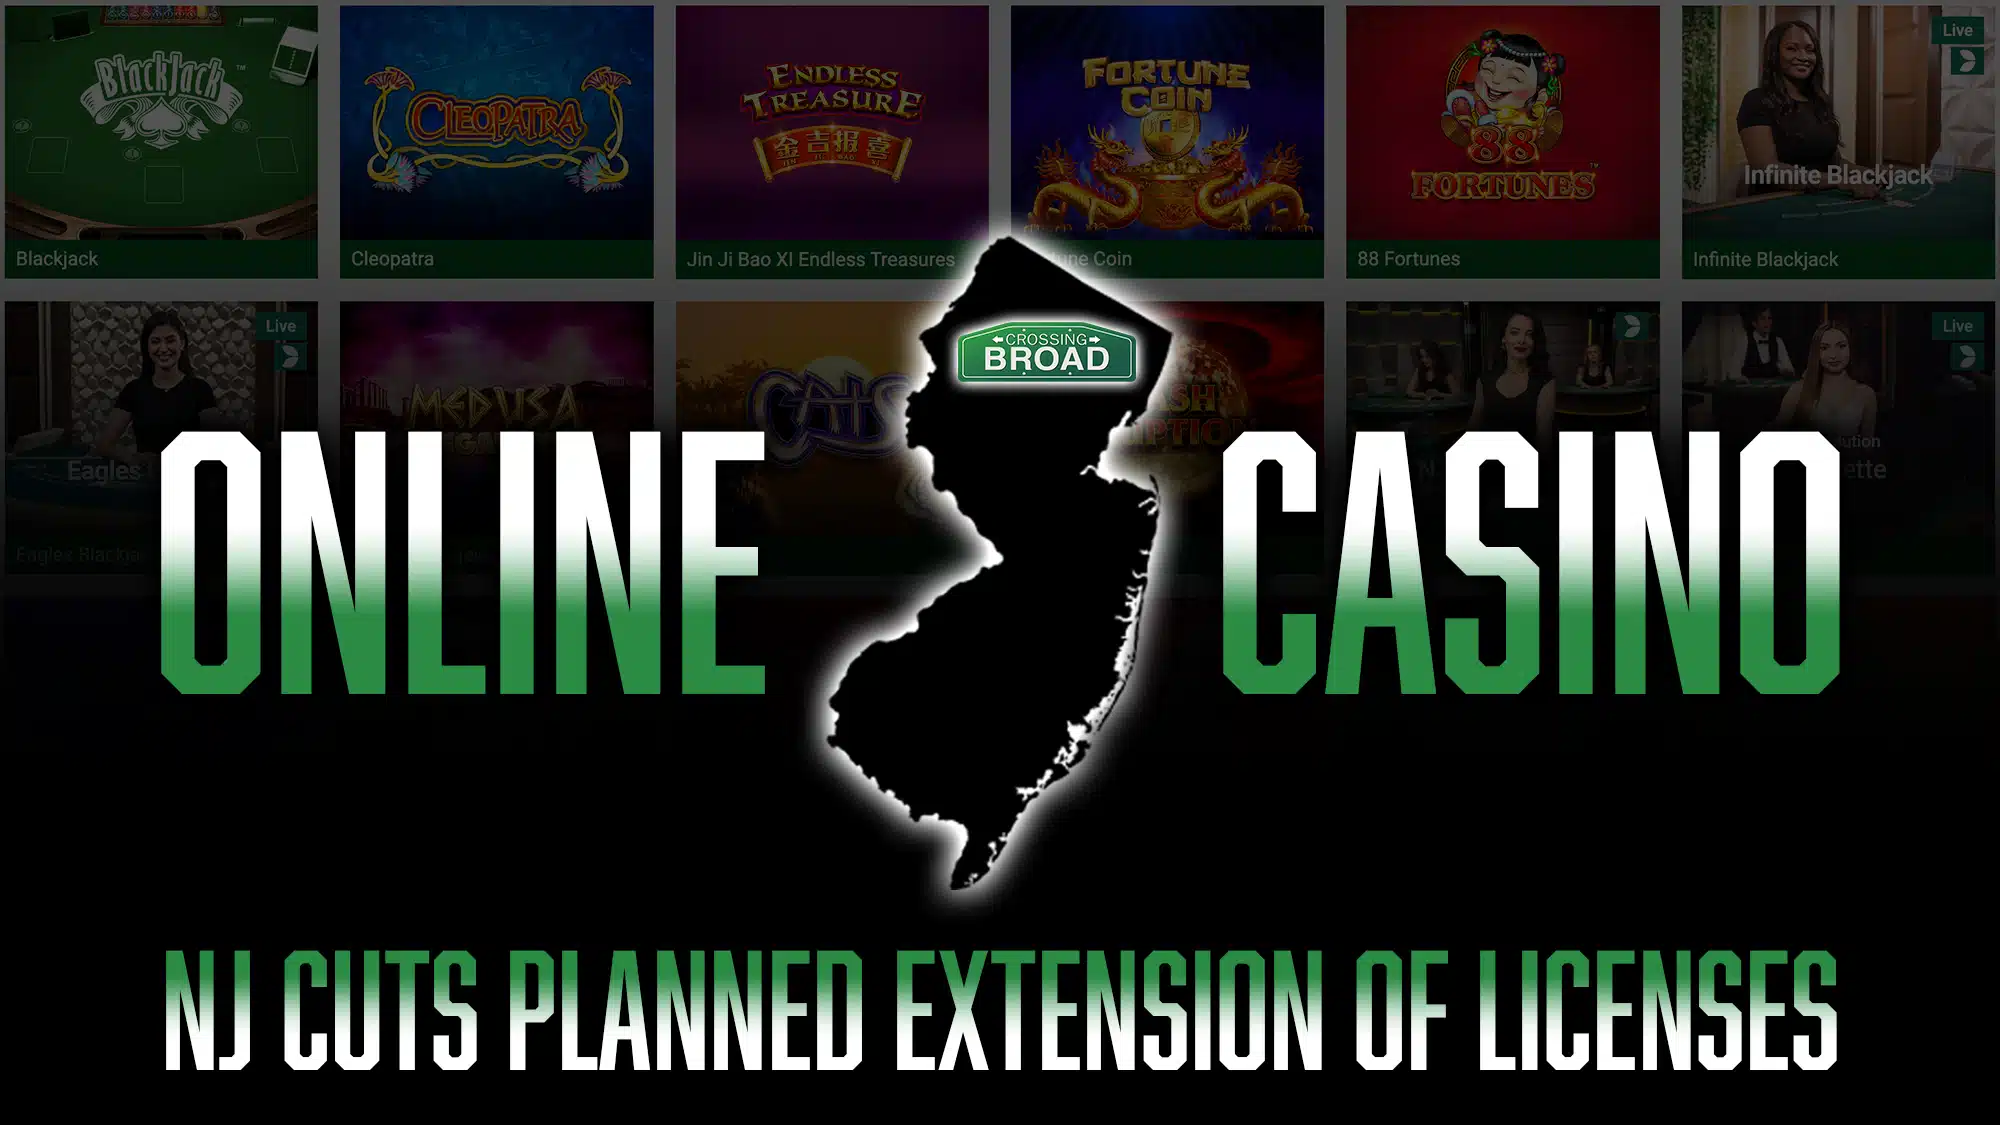 NJ Online Casino cuts planned extension of licenses